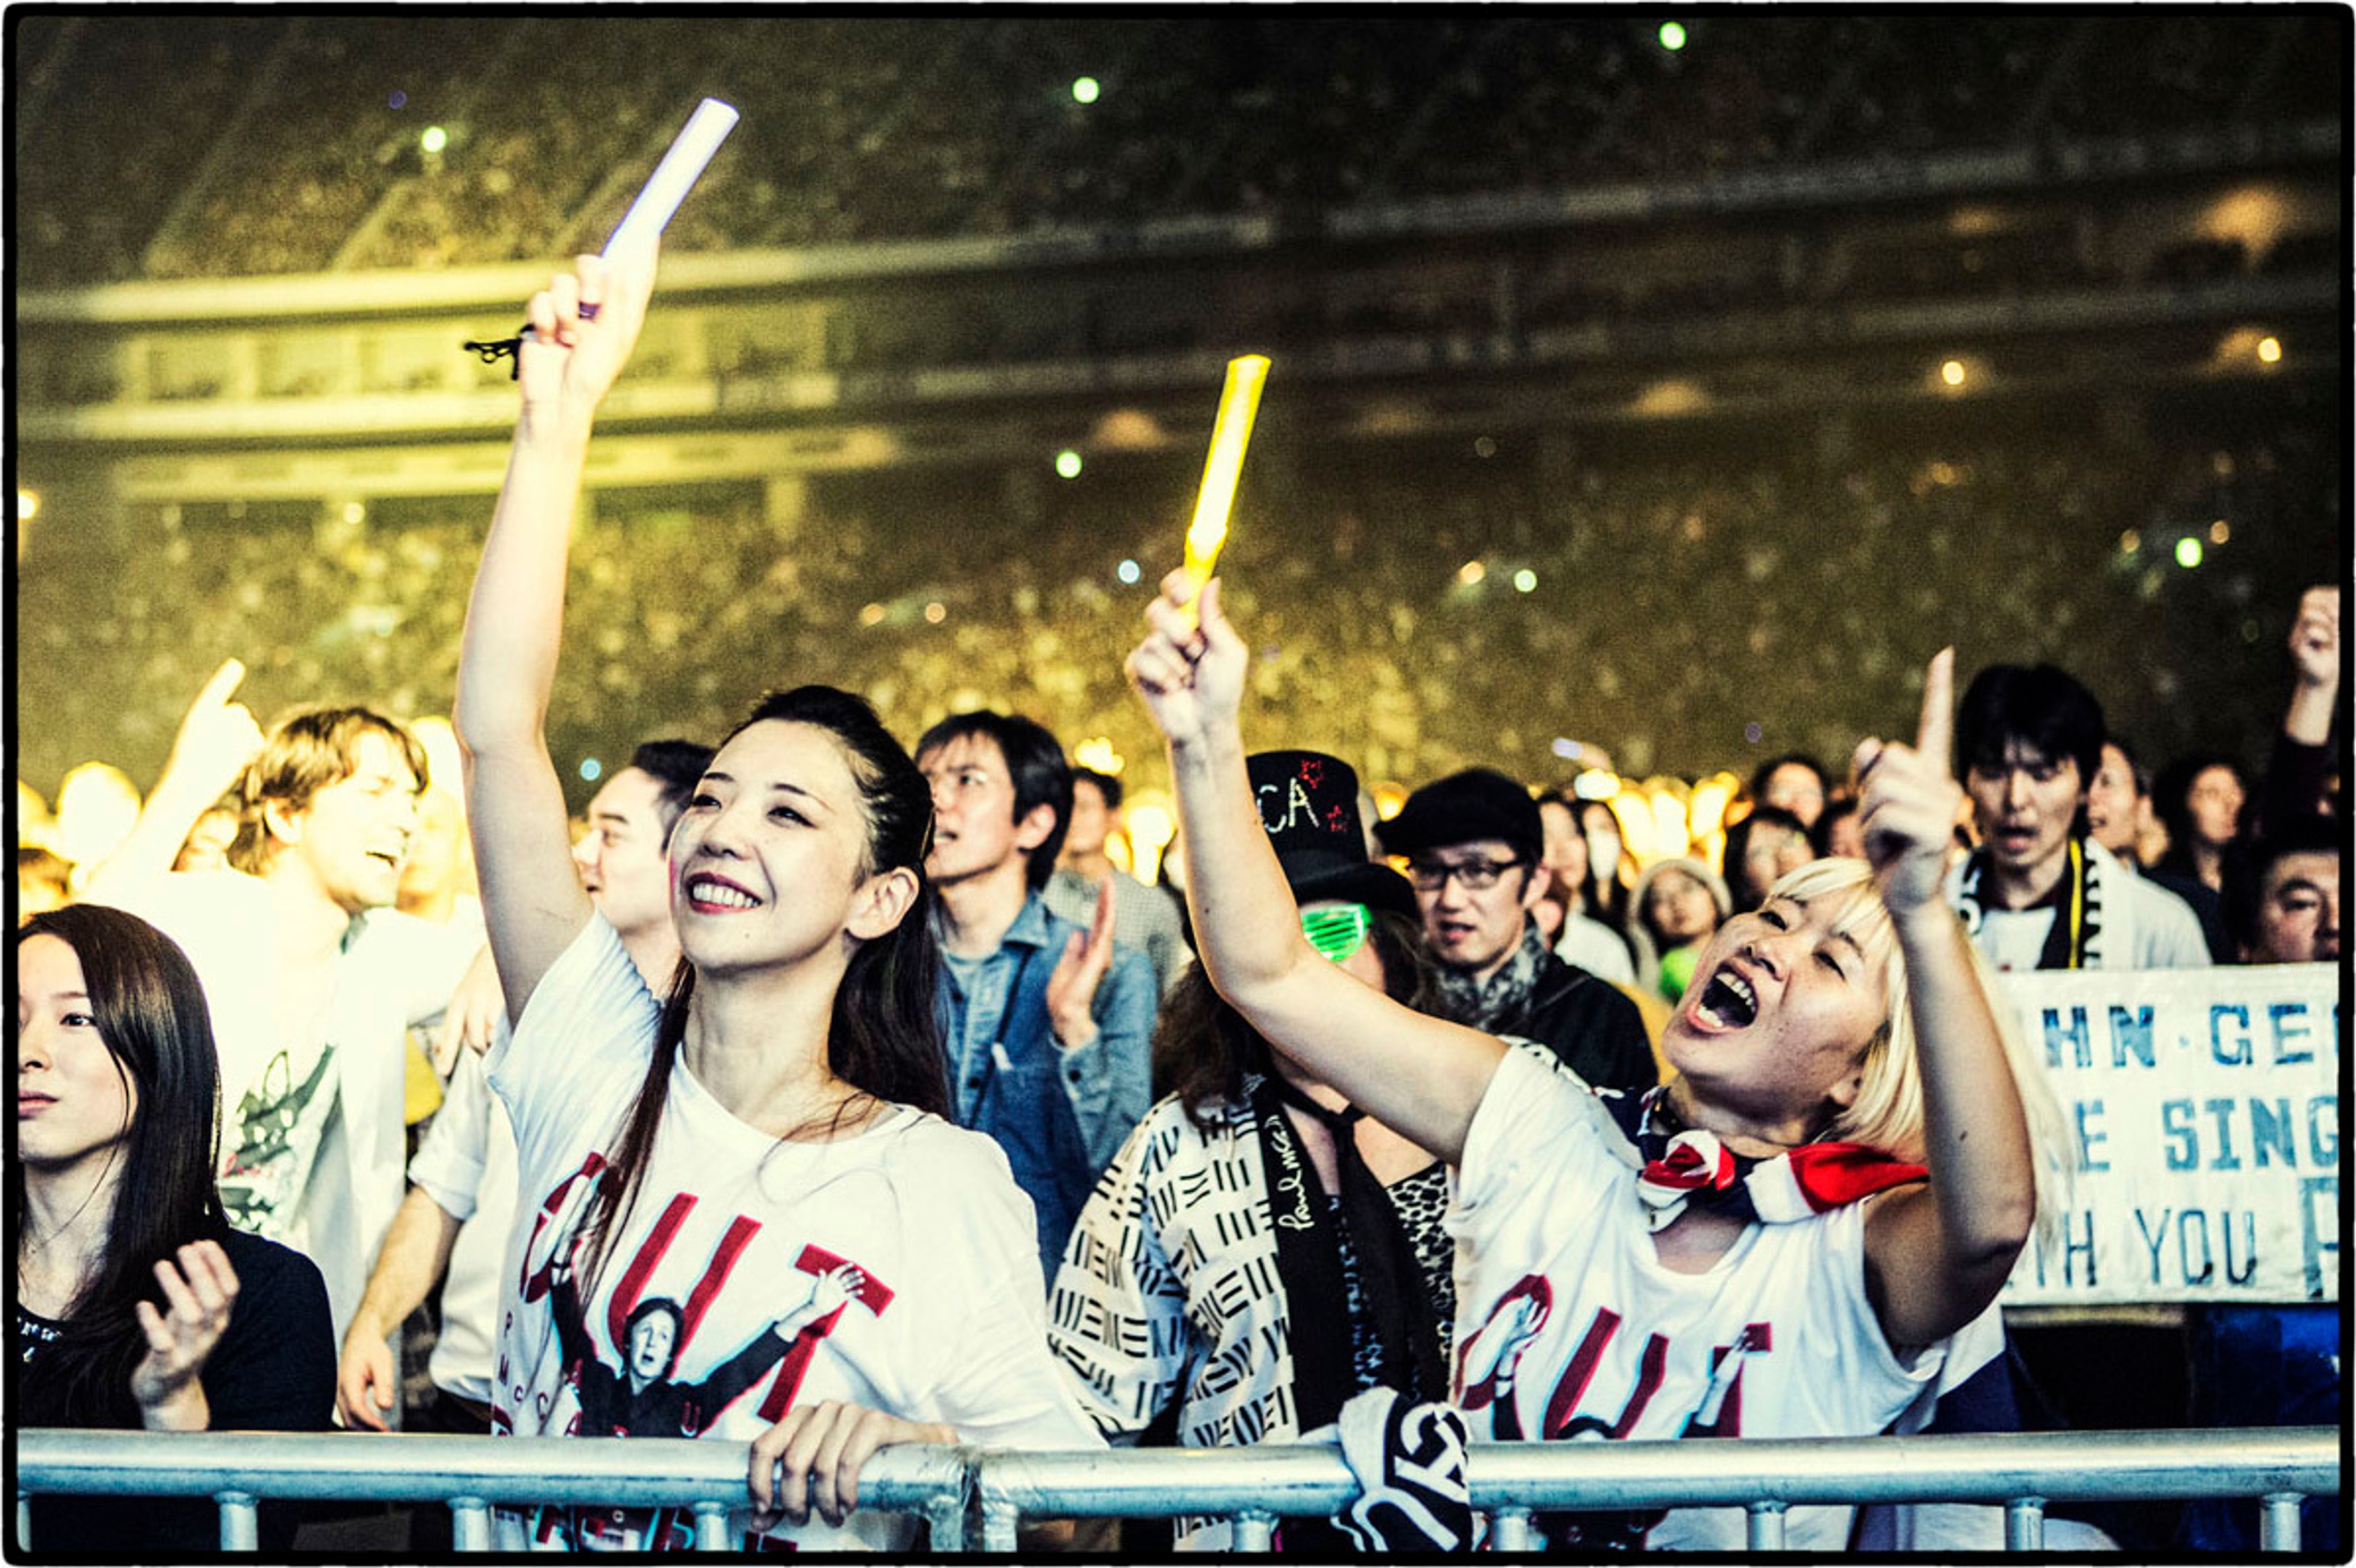 The crowd at the Tokyo Dome, Tokyo, 21st November 2013